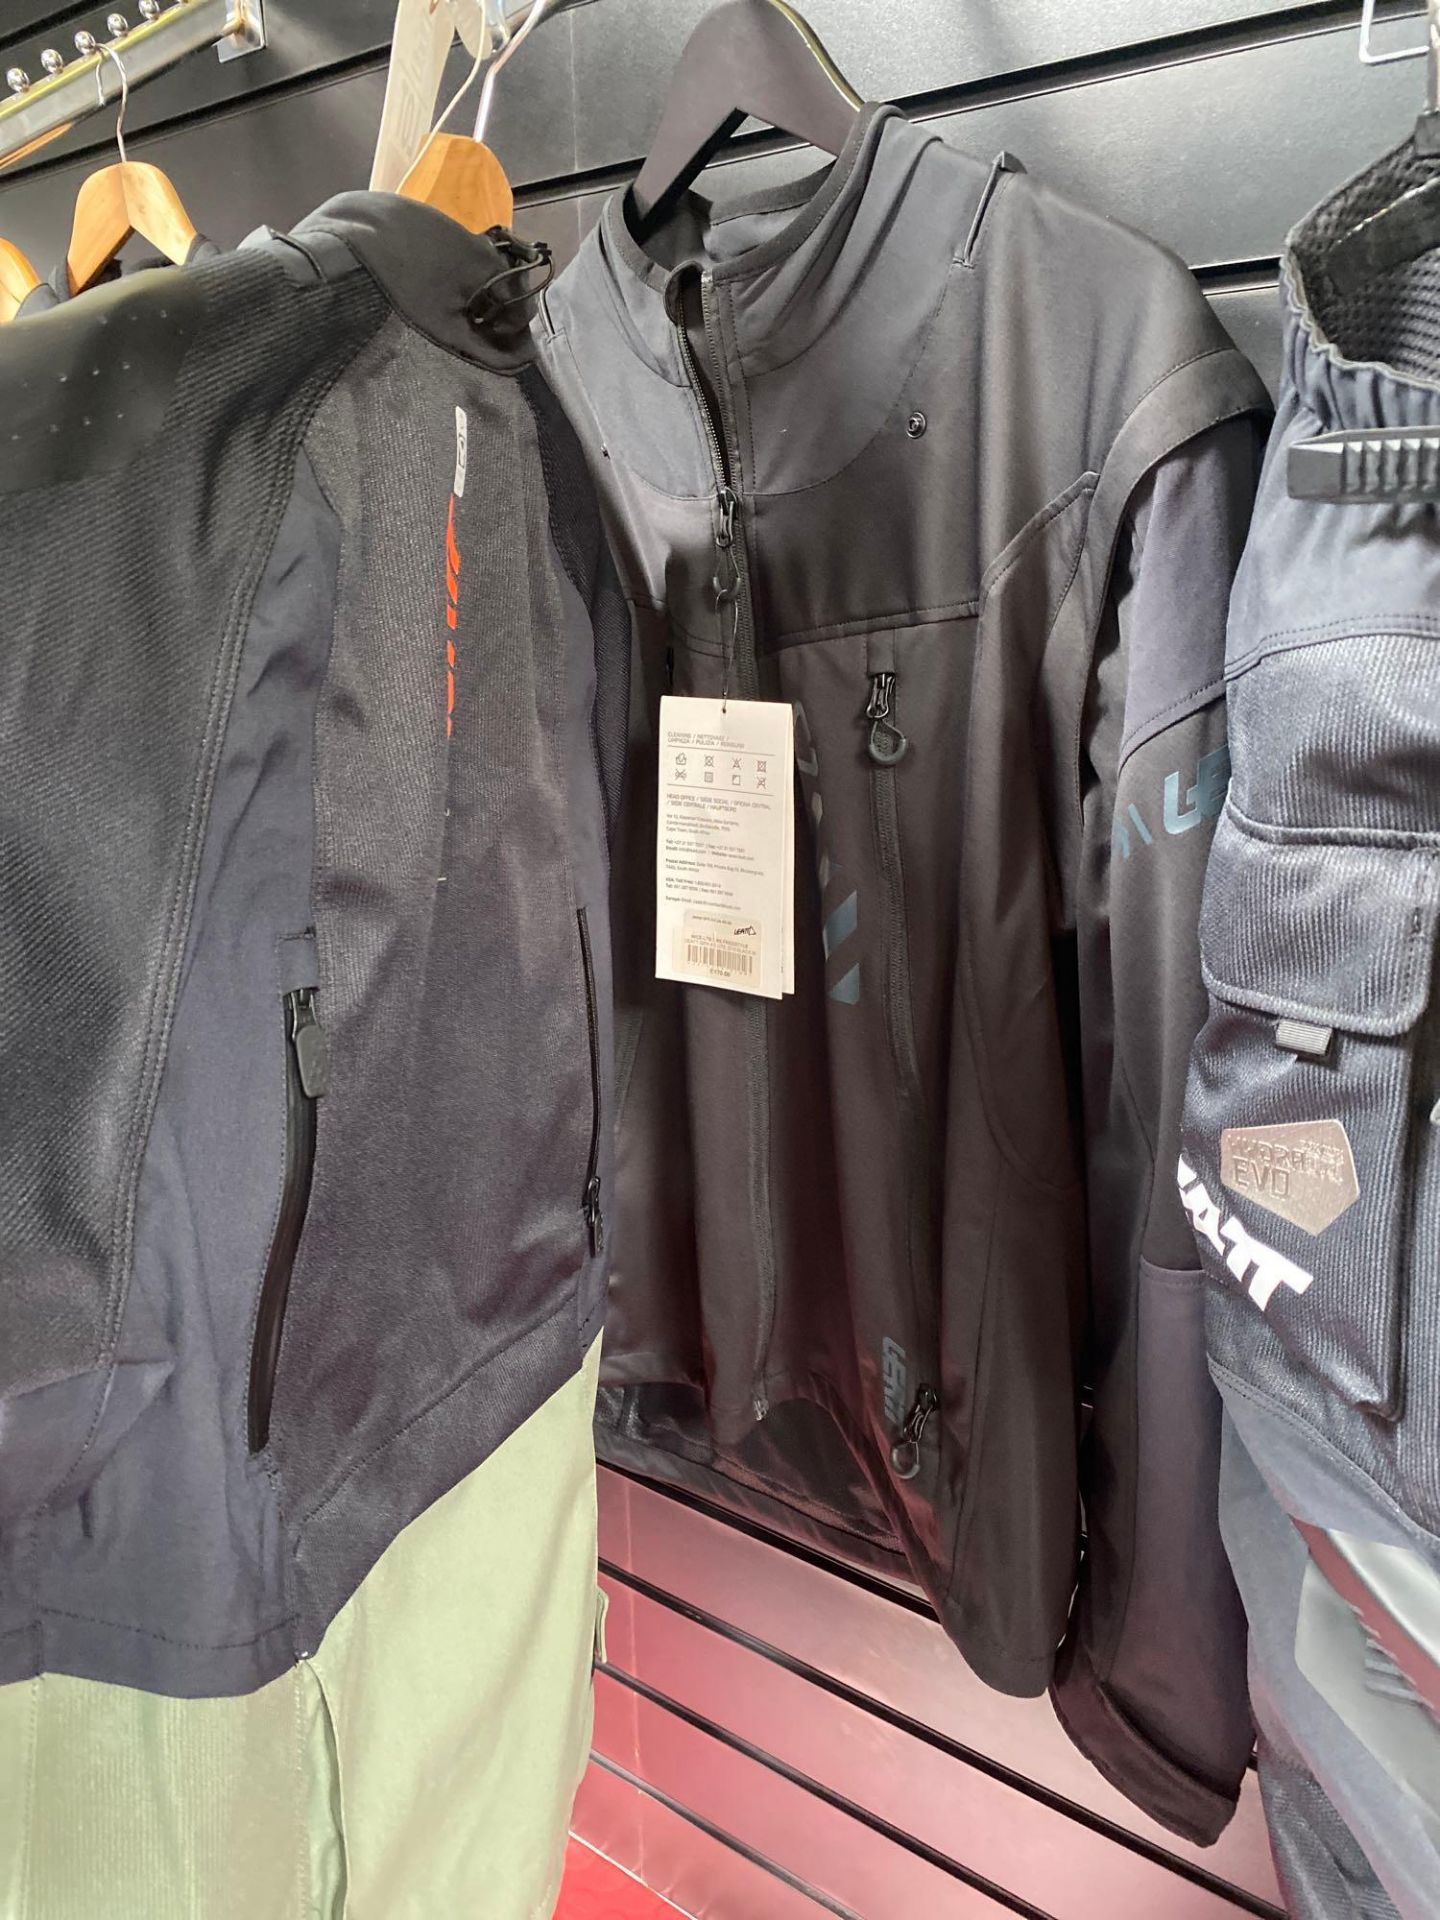 4 Leatt motorbike jackets, and one pair of Leatt protective motorbike trousers - Image 3 of 4